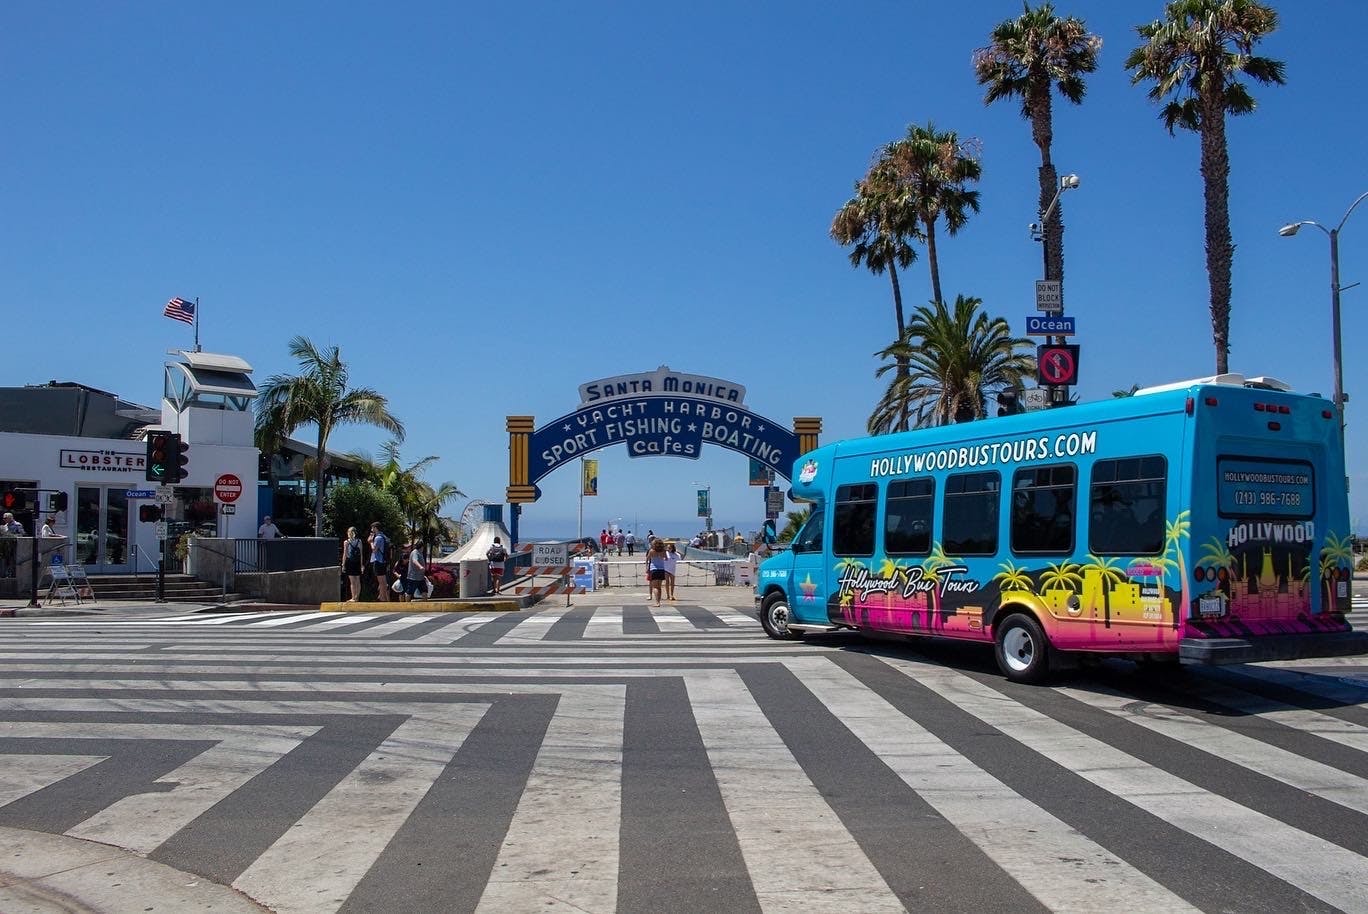 Los Angeles highlights half-day sightseeing tour